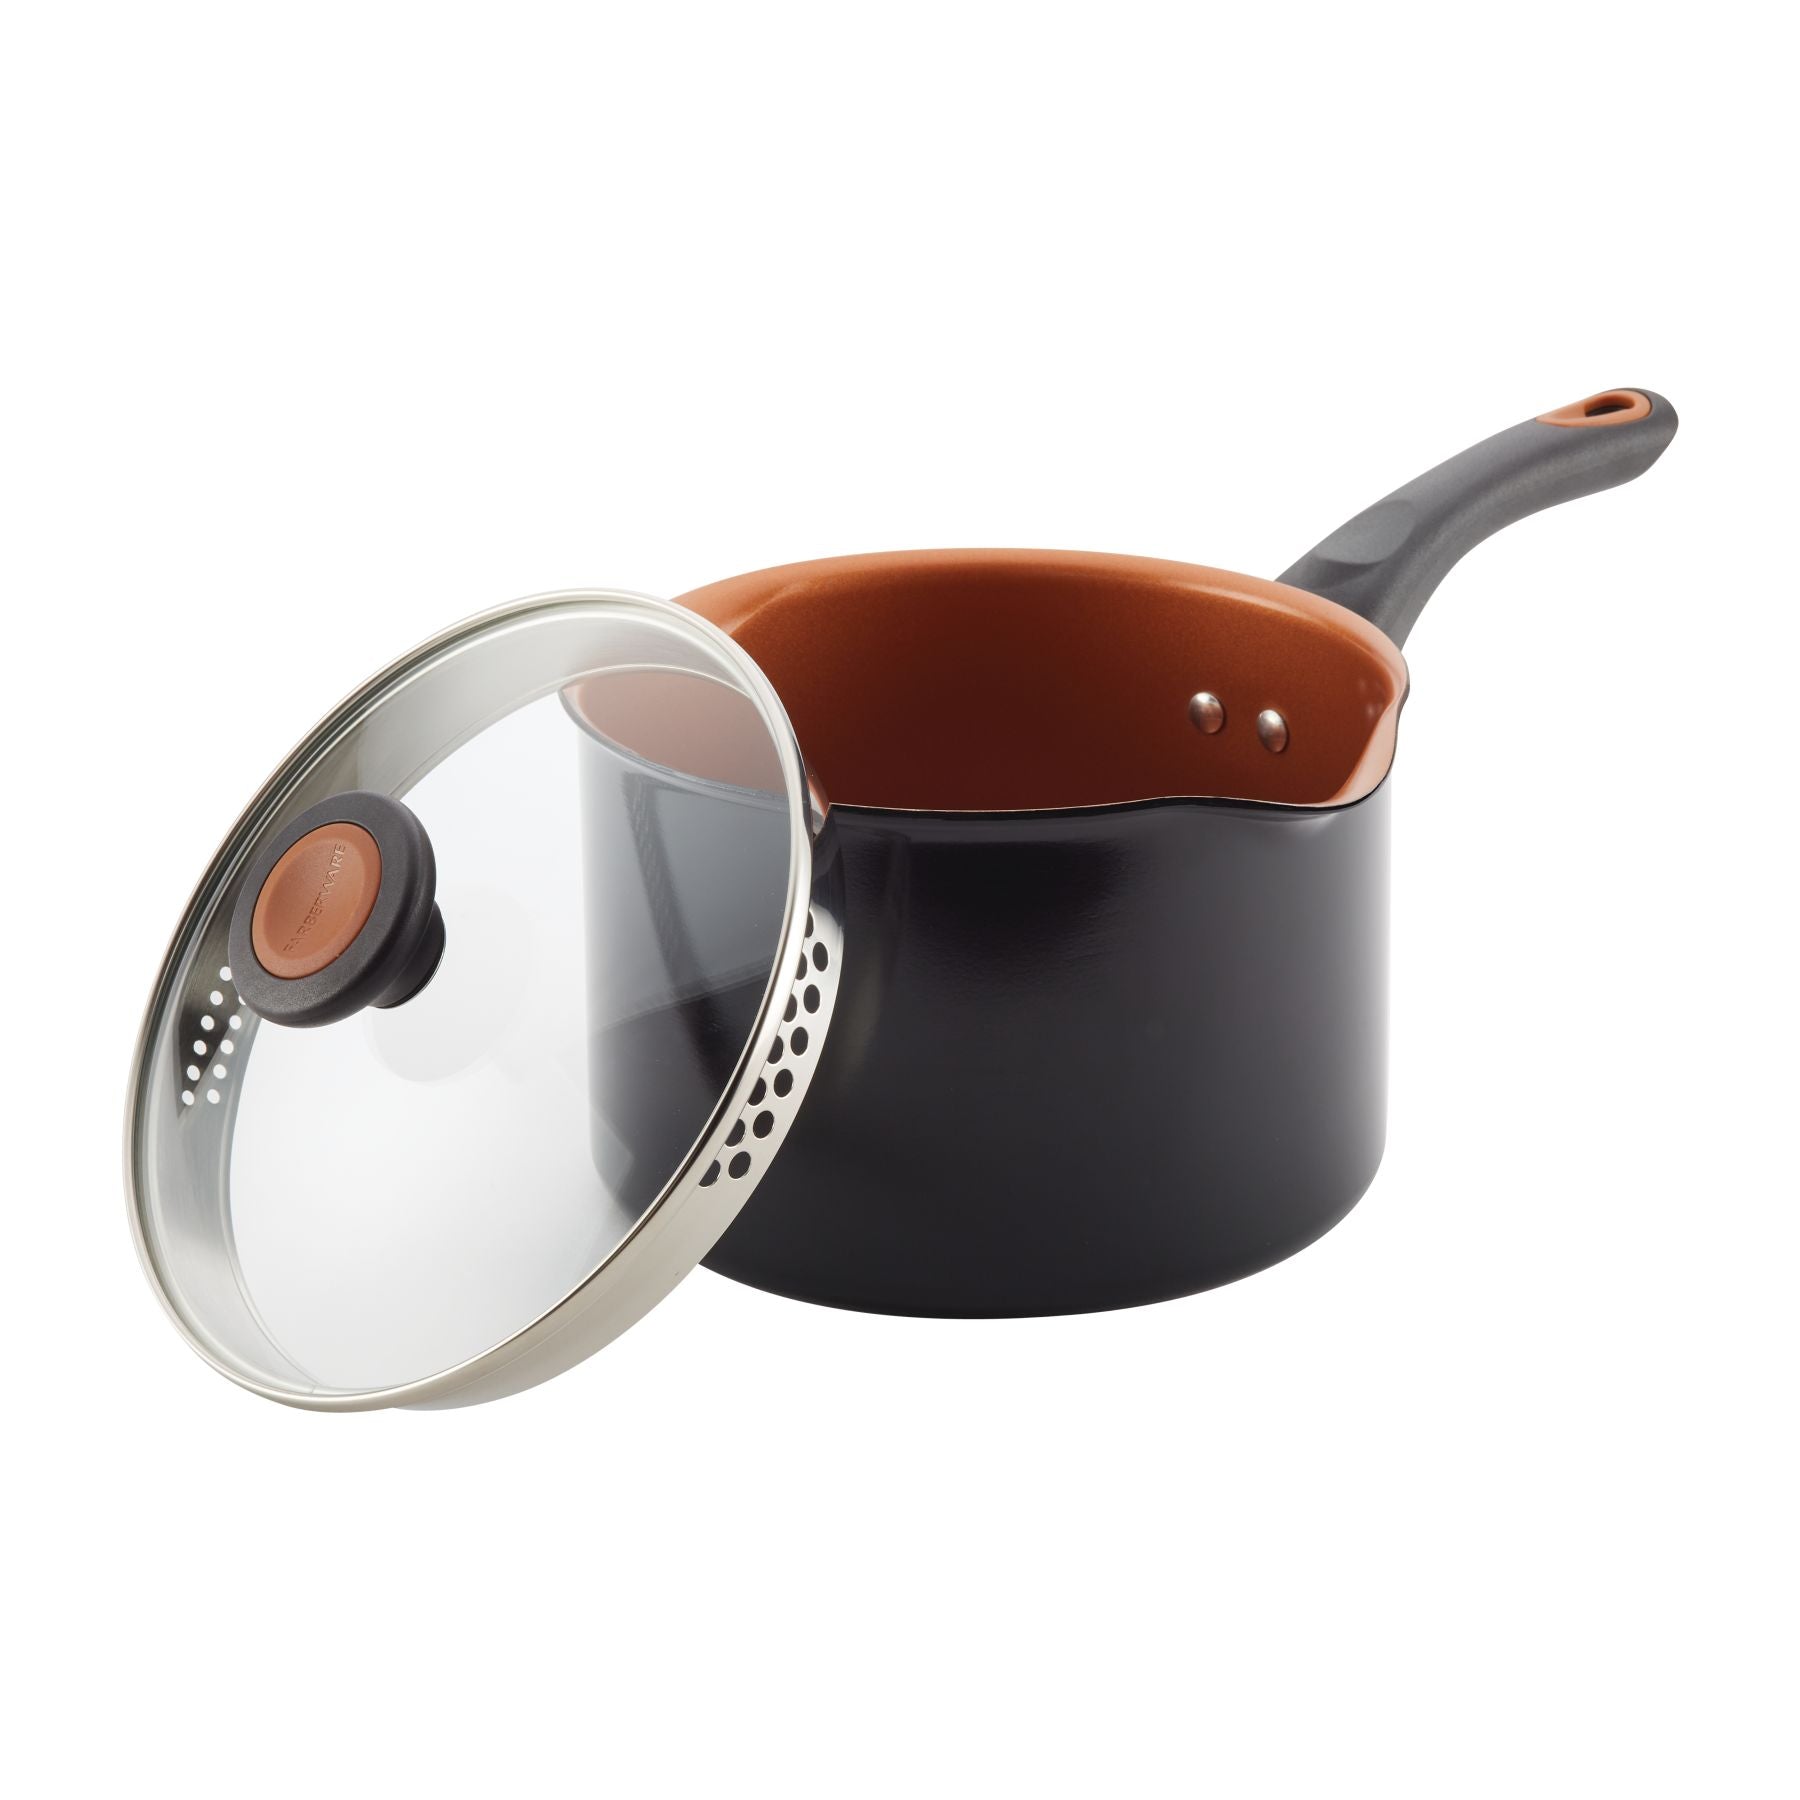 MICHELANGELO 1 Quart Saucepan with Lid, Ultra Nonstick Coppper Sauce Pan  with Lid, Small Pot with Lid, Ceramic Nonstick Saucepan 1 quart, Small  Sauce